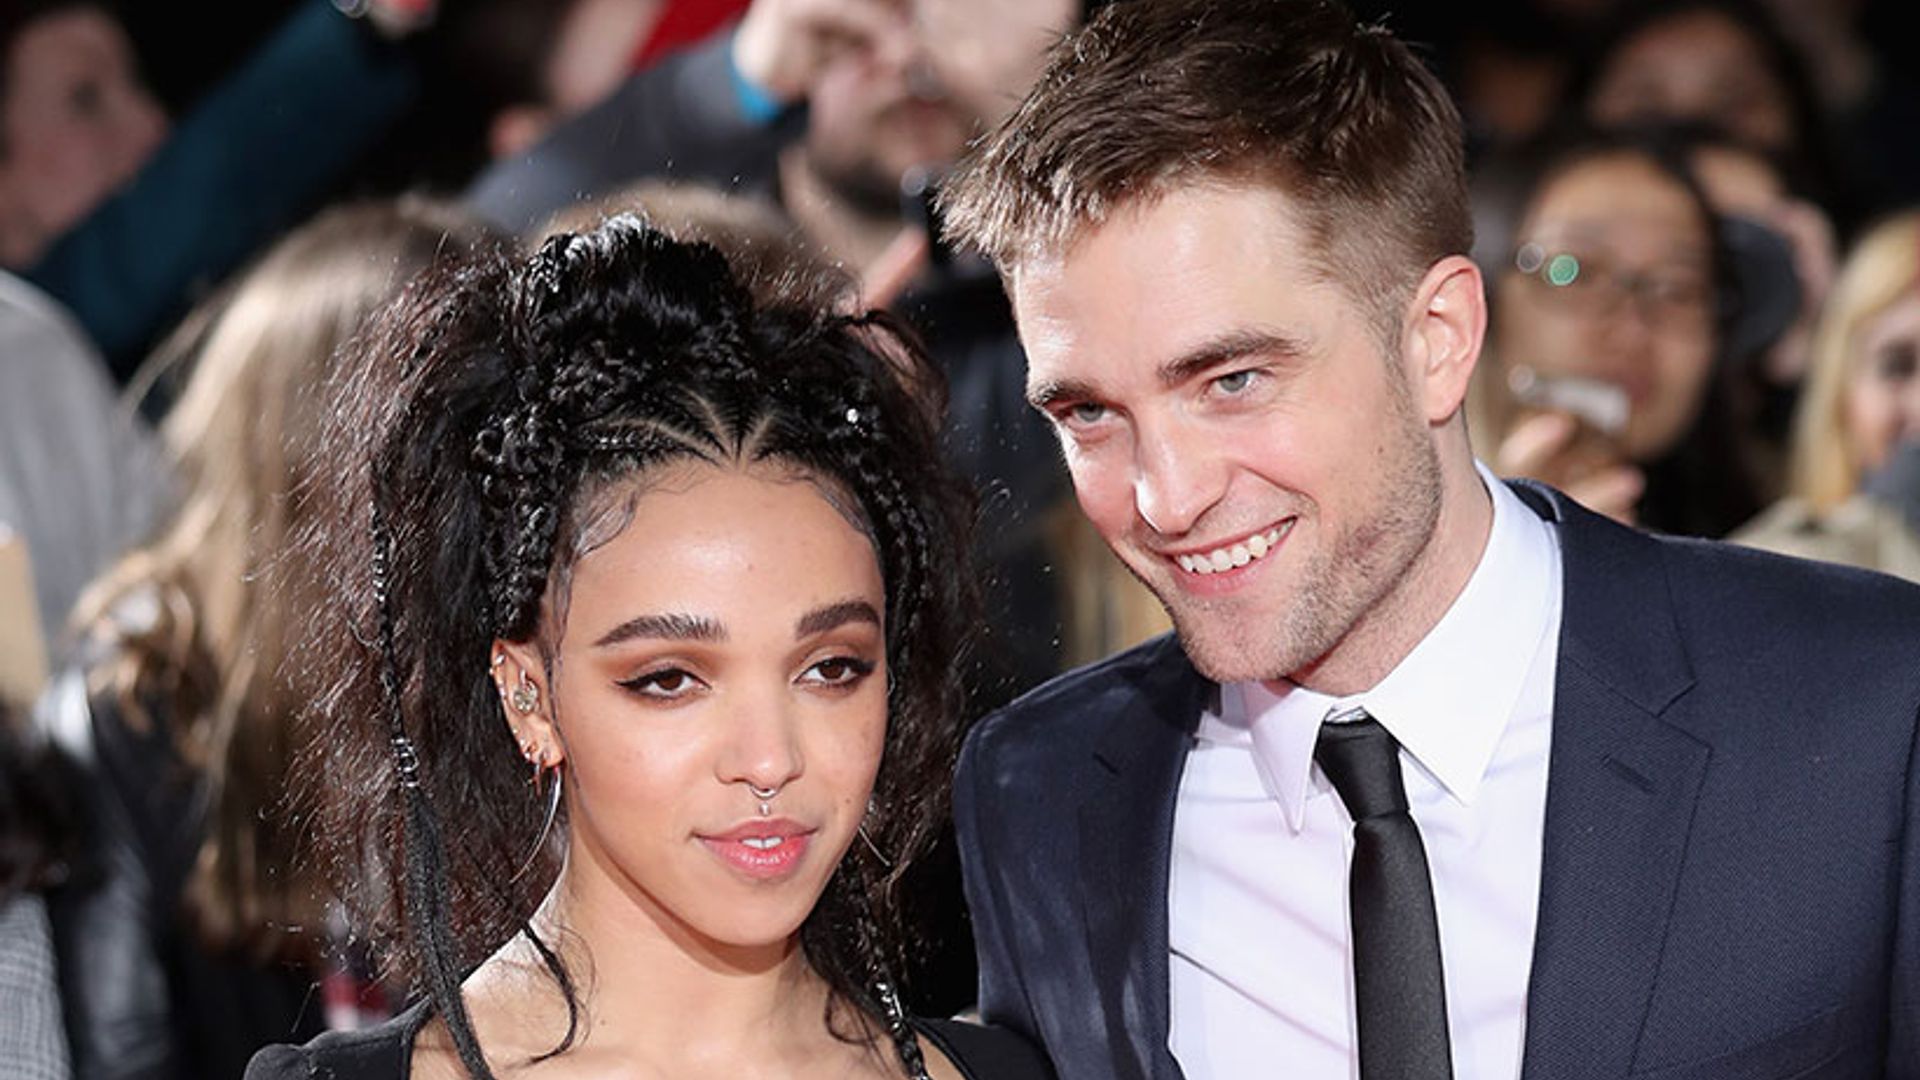 Robert Pattinson gushes over romance with girlfriend FKA Twigs: 'We're kind of engaged'